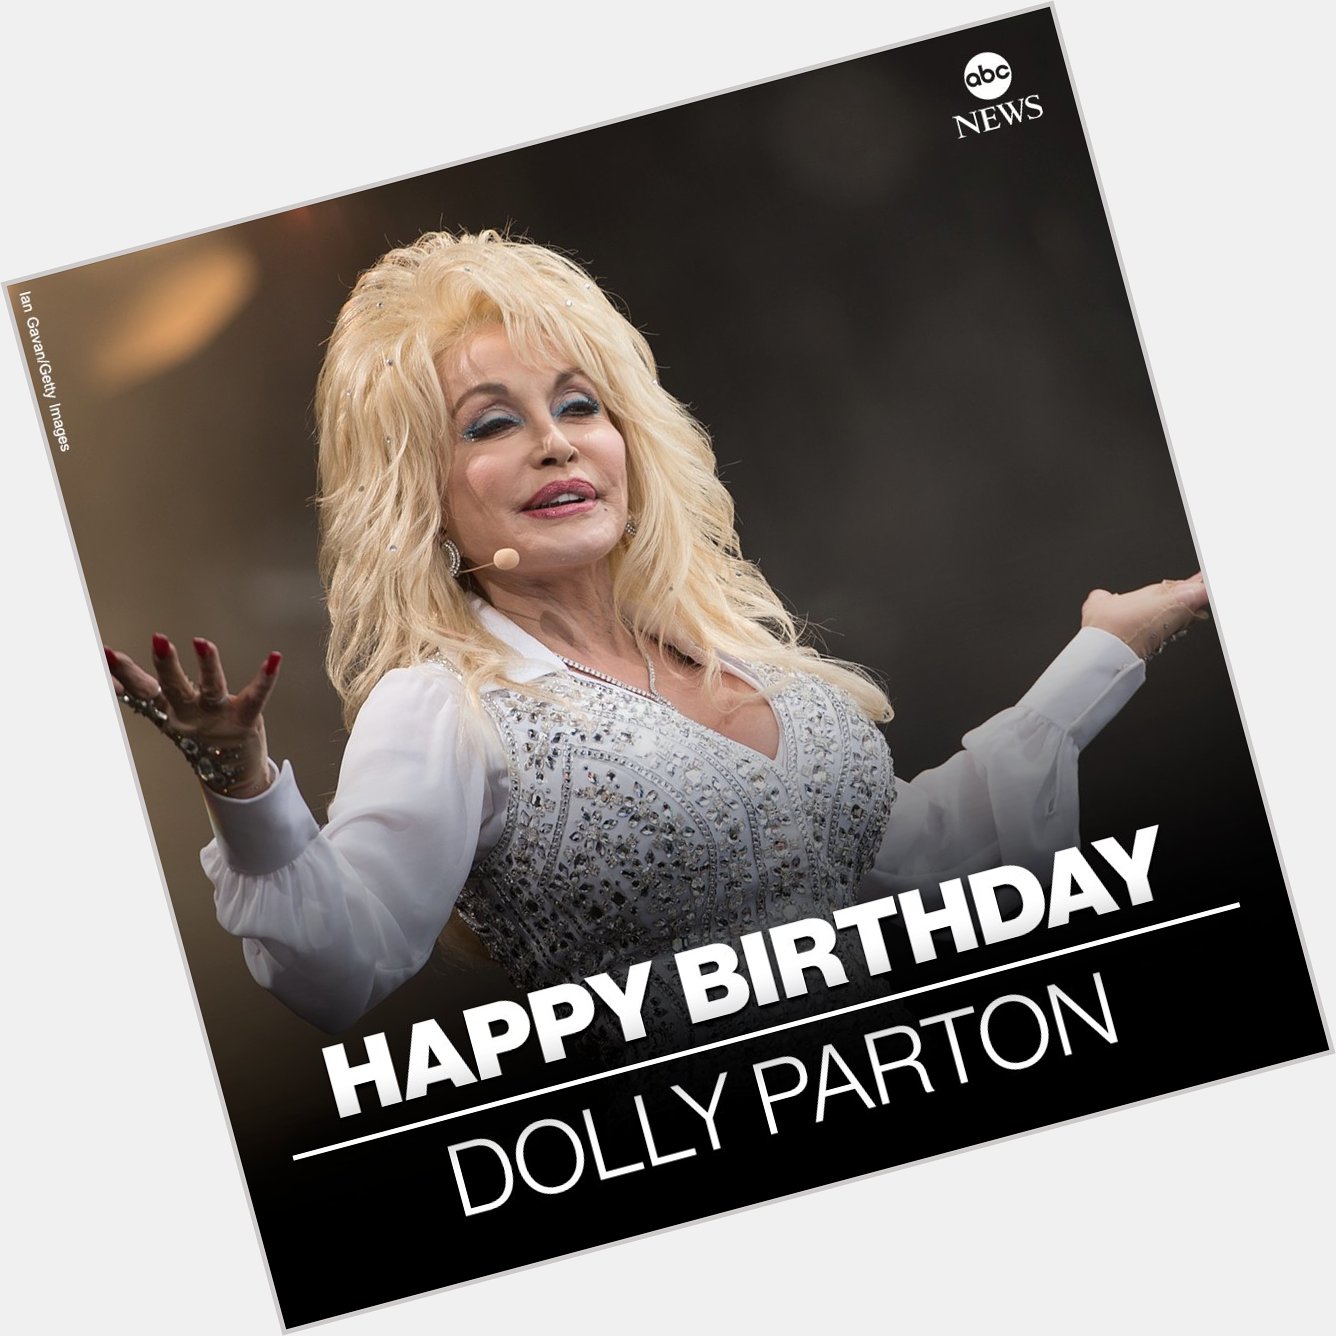 HAPPY BIRTHDAY: Country singer Dolly Parton is 77 today.  